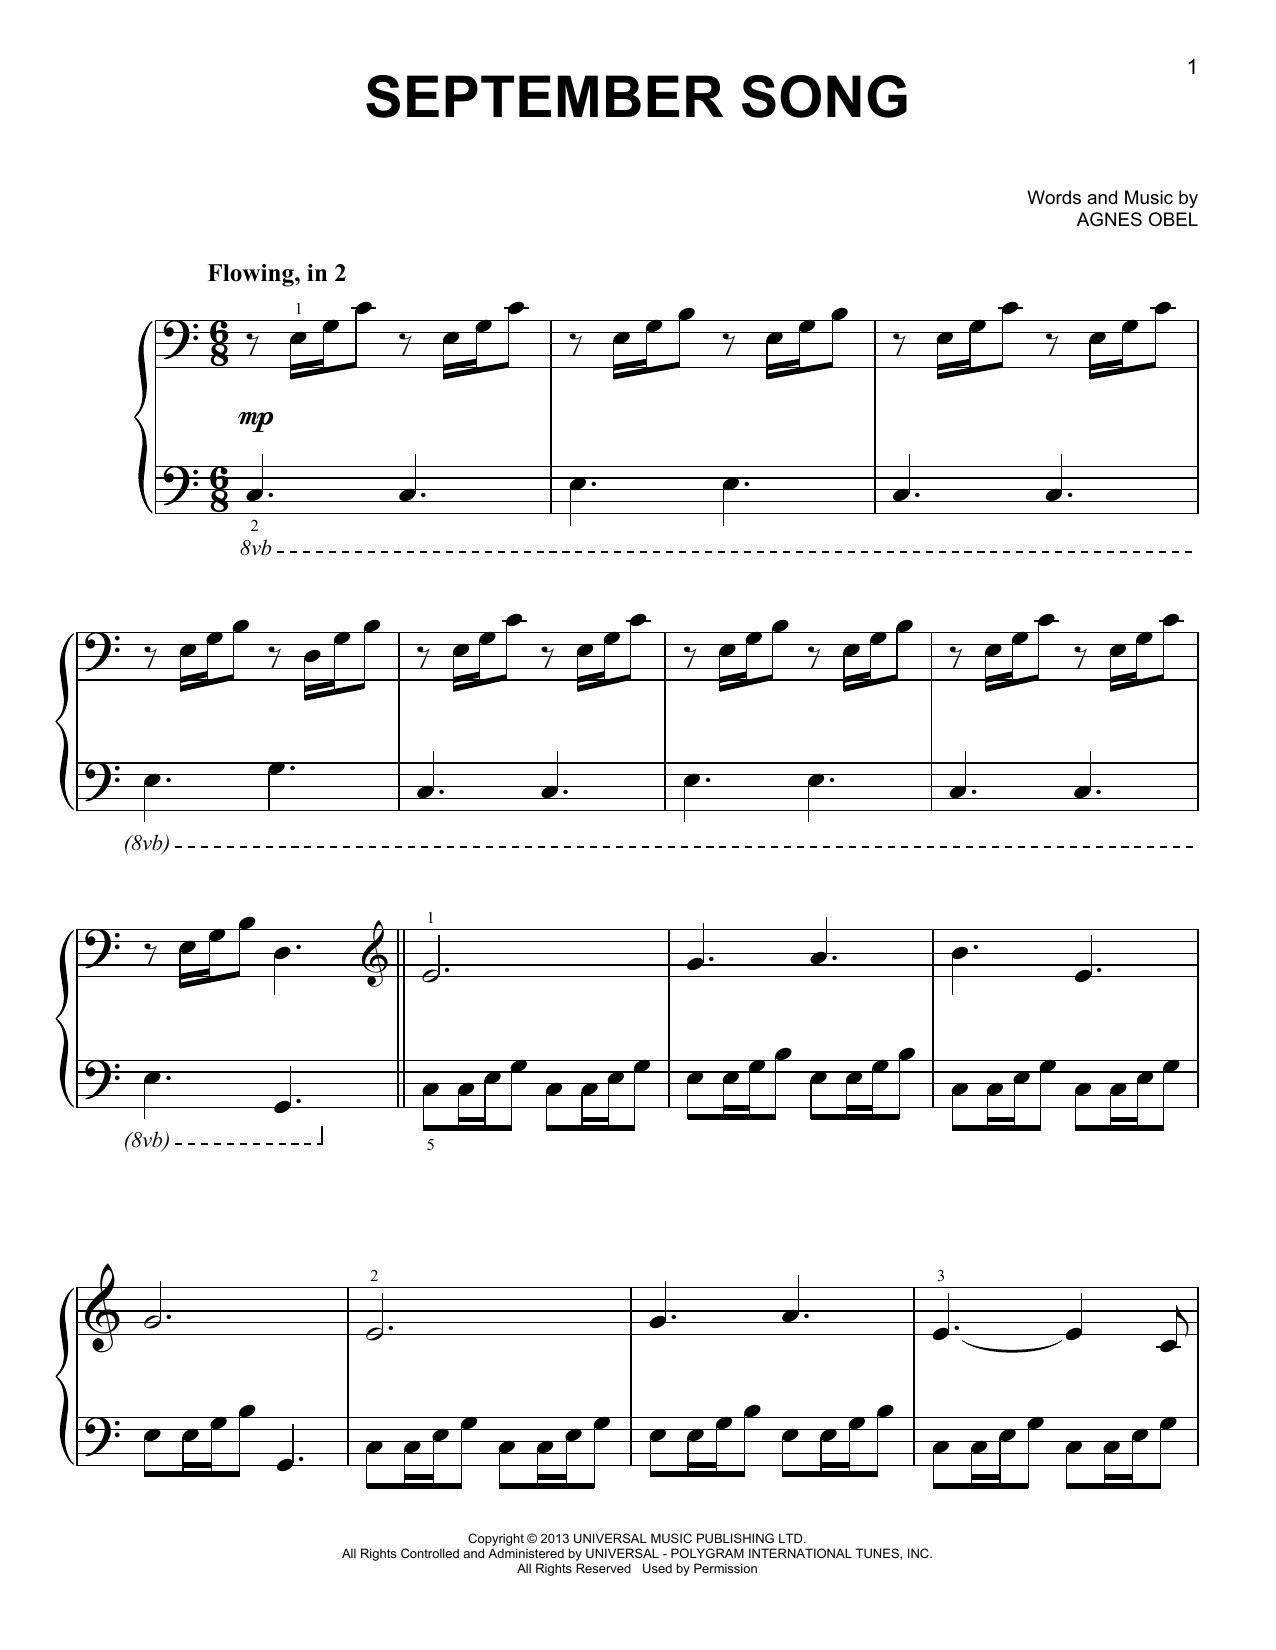 Agnes Obel September Song sheet music notes and chords. Download Printable PDF.